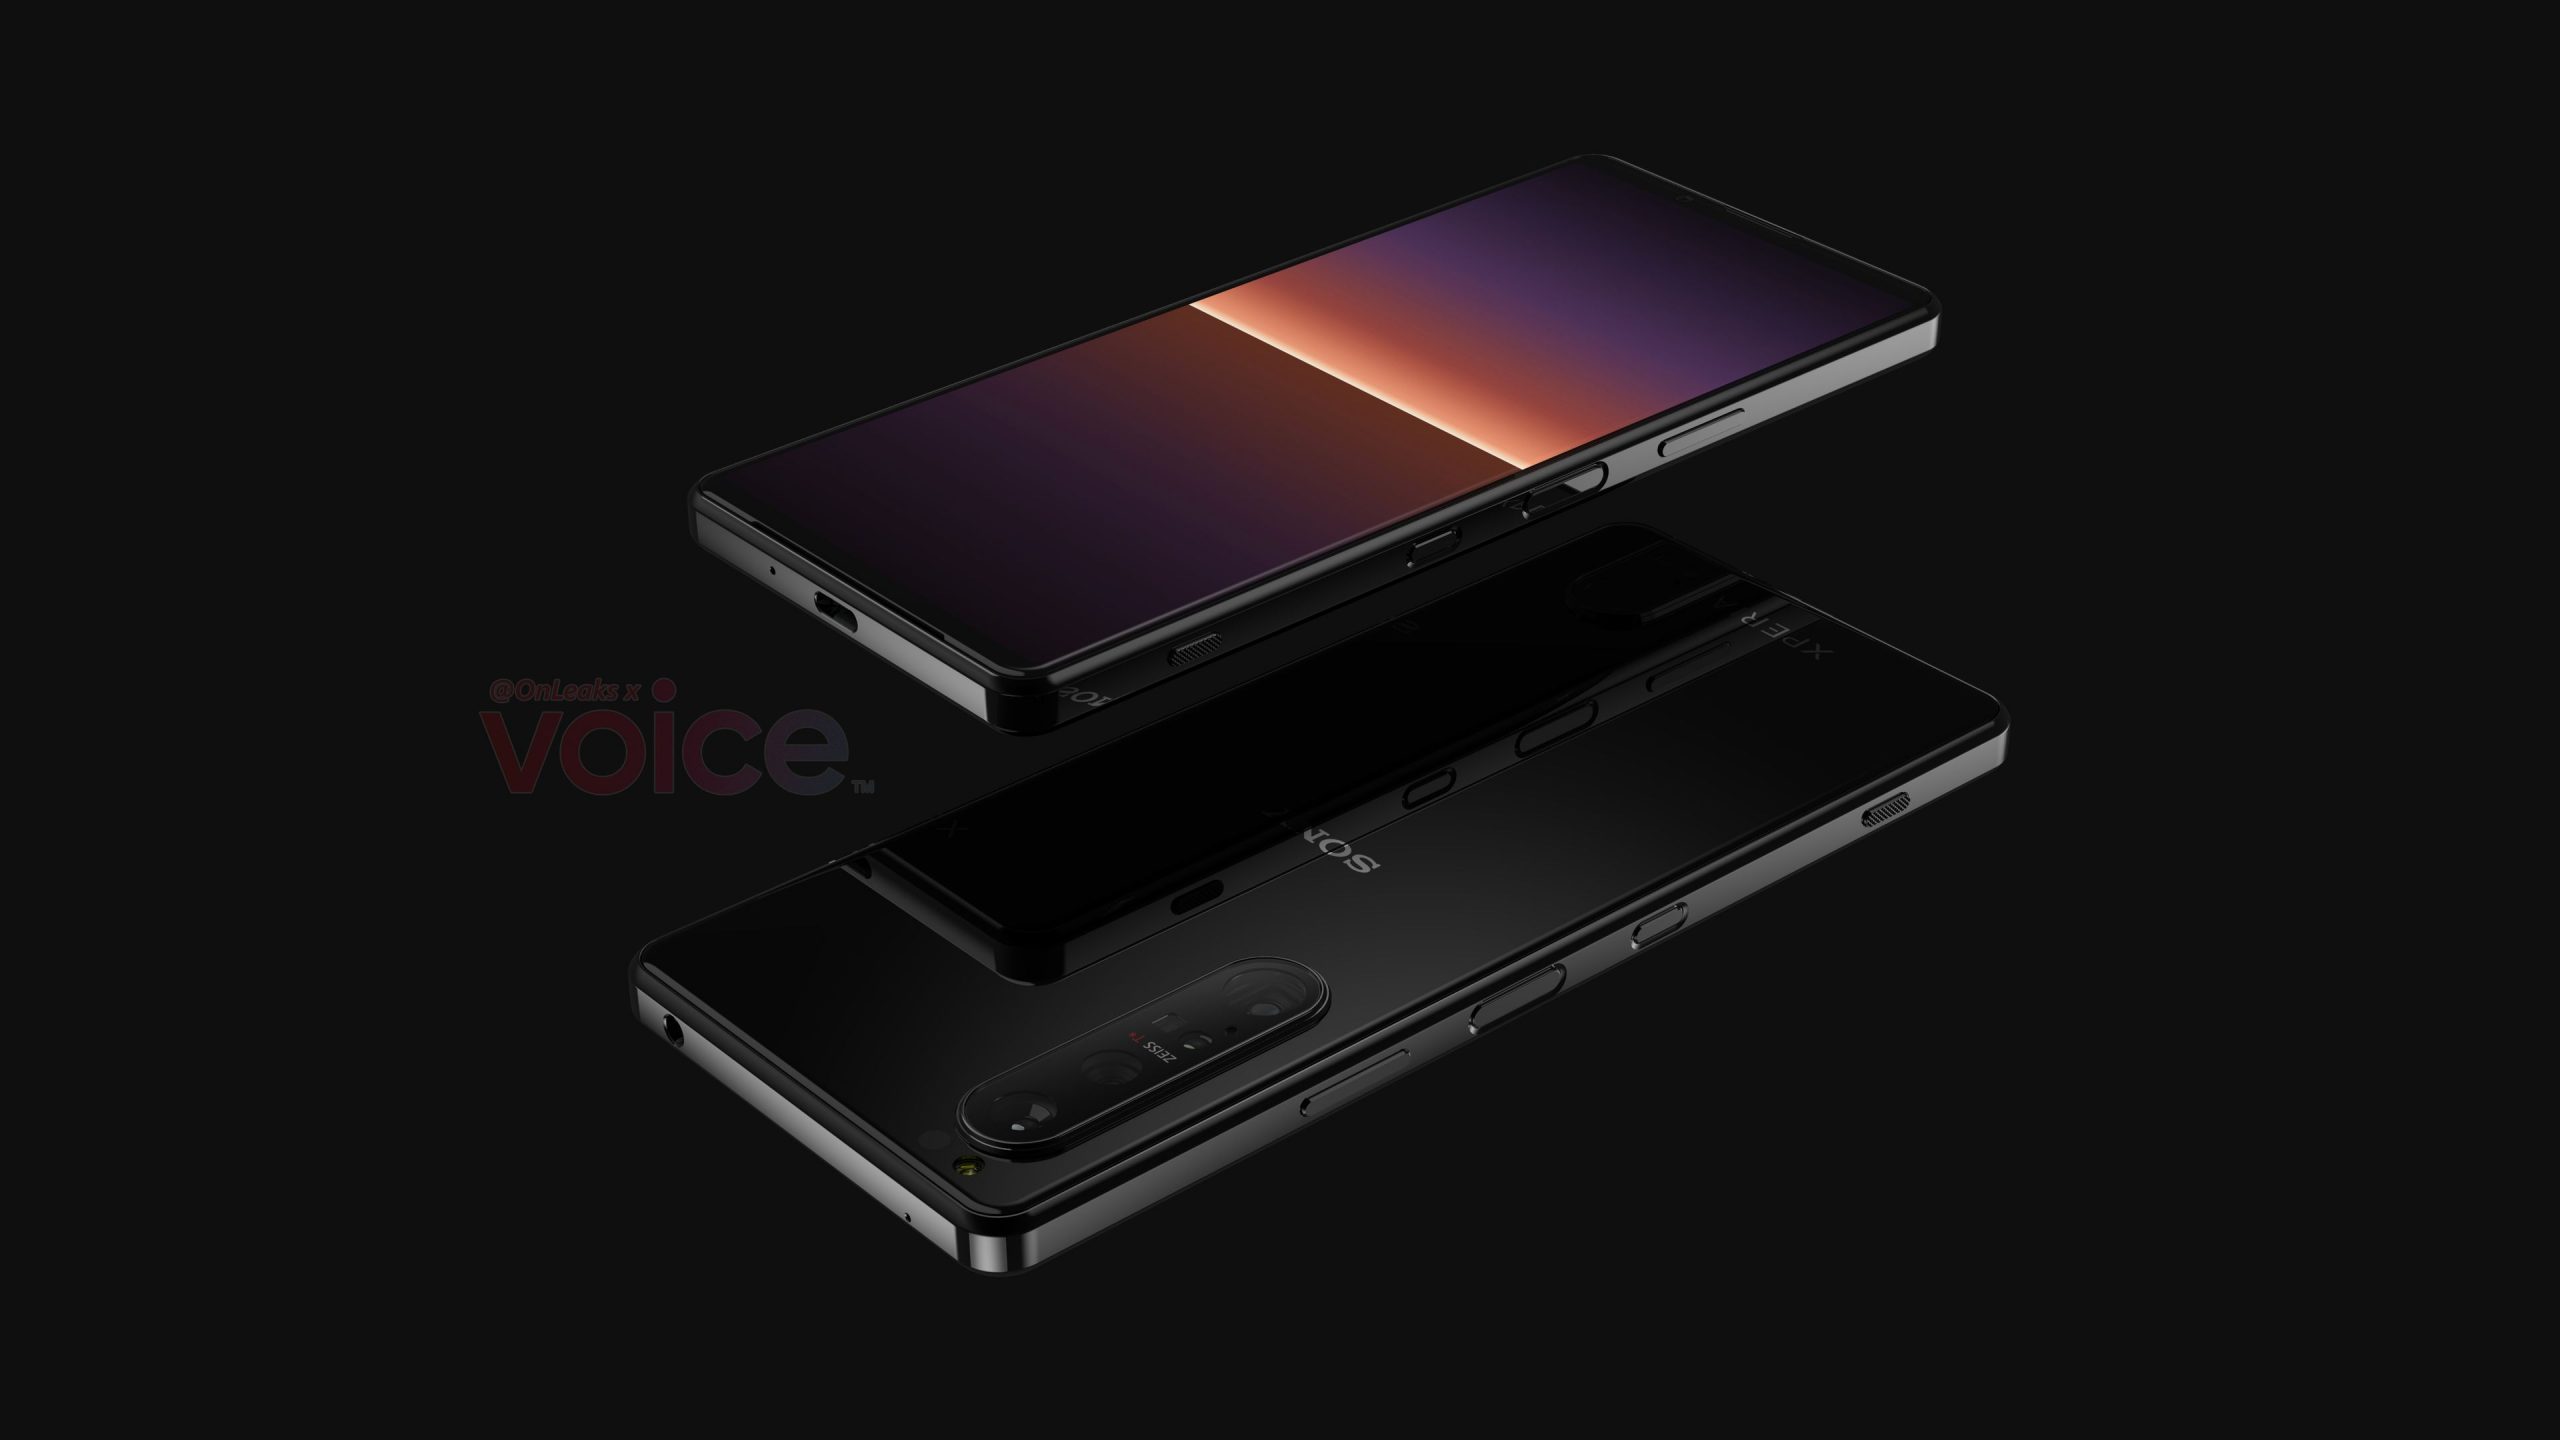 Alleged Sony Xperia 10 III spotted with Snapdragon 690 and 6GB RAM